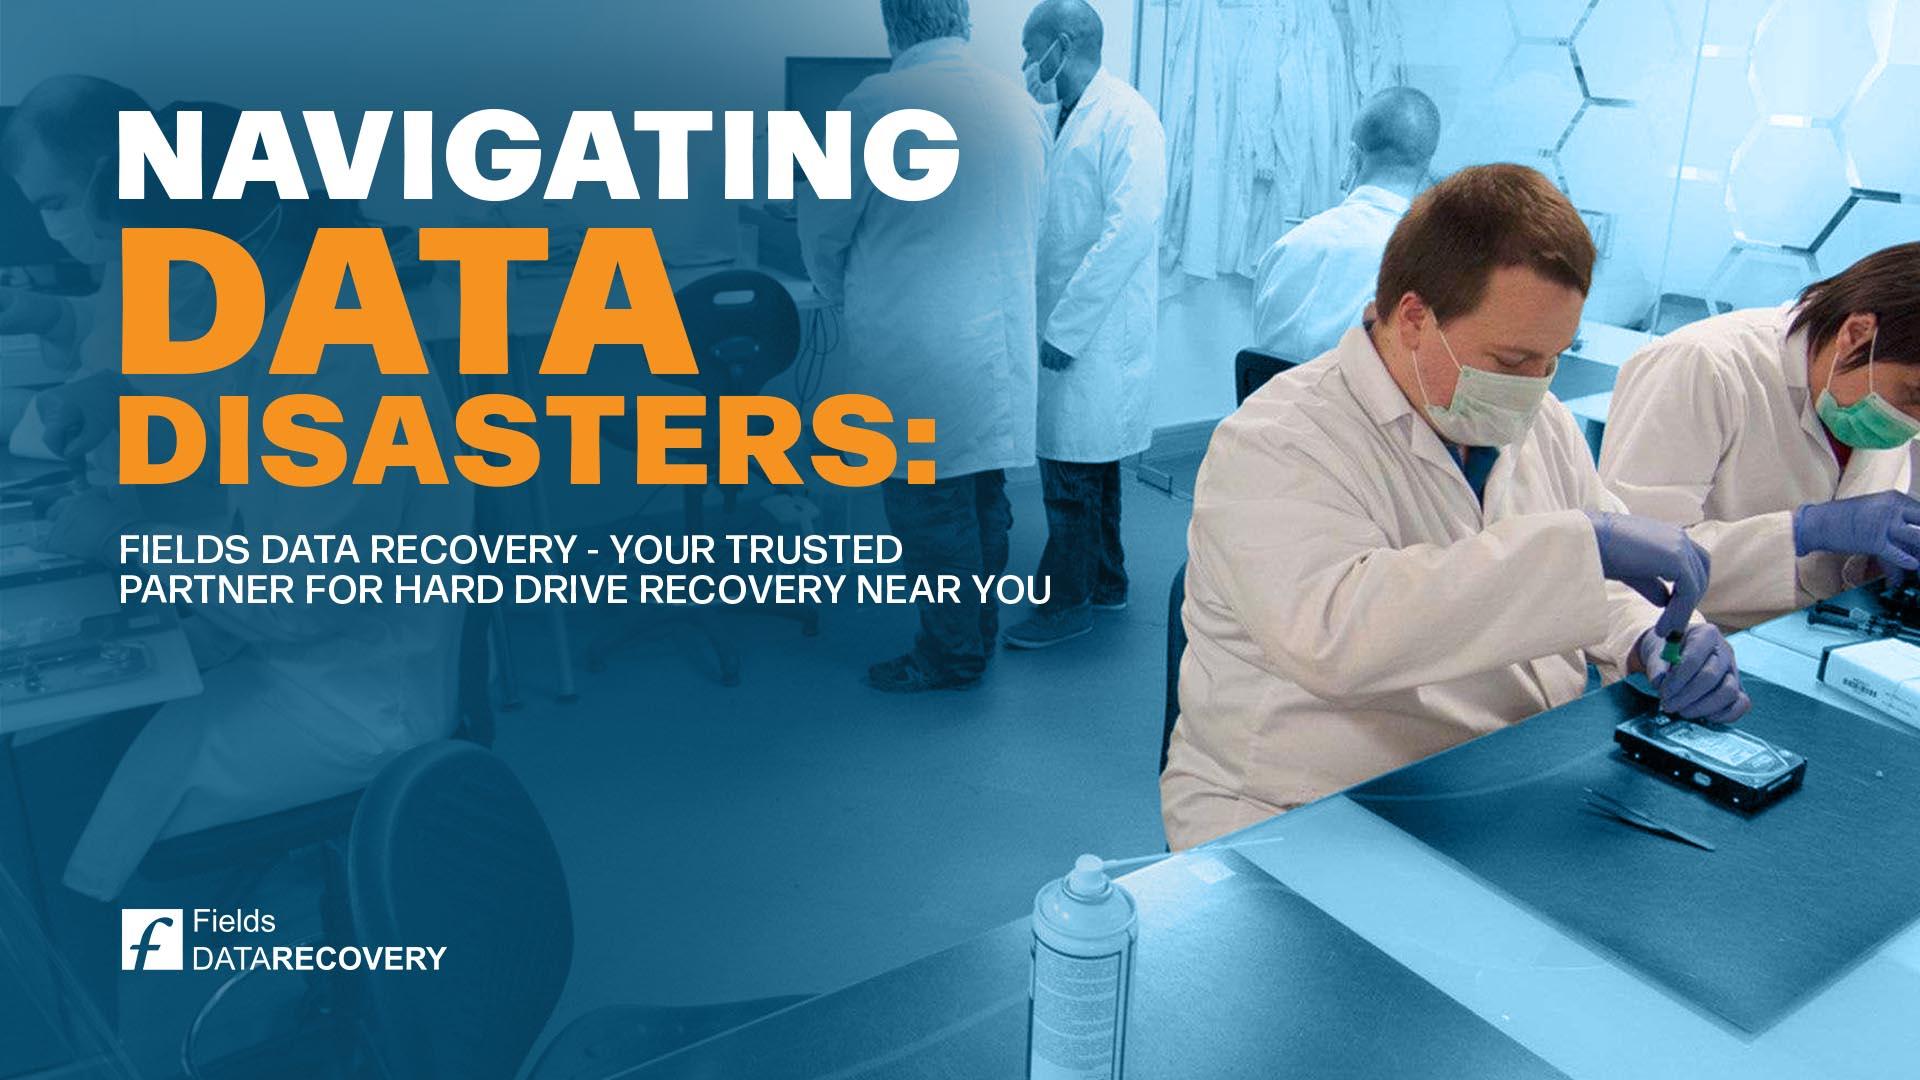 Navigating Data Disasters: Fields Data Recovery - Your Trusted Partner for Hard Drive Recovery Near You